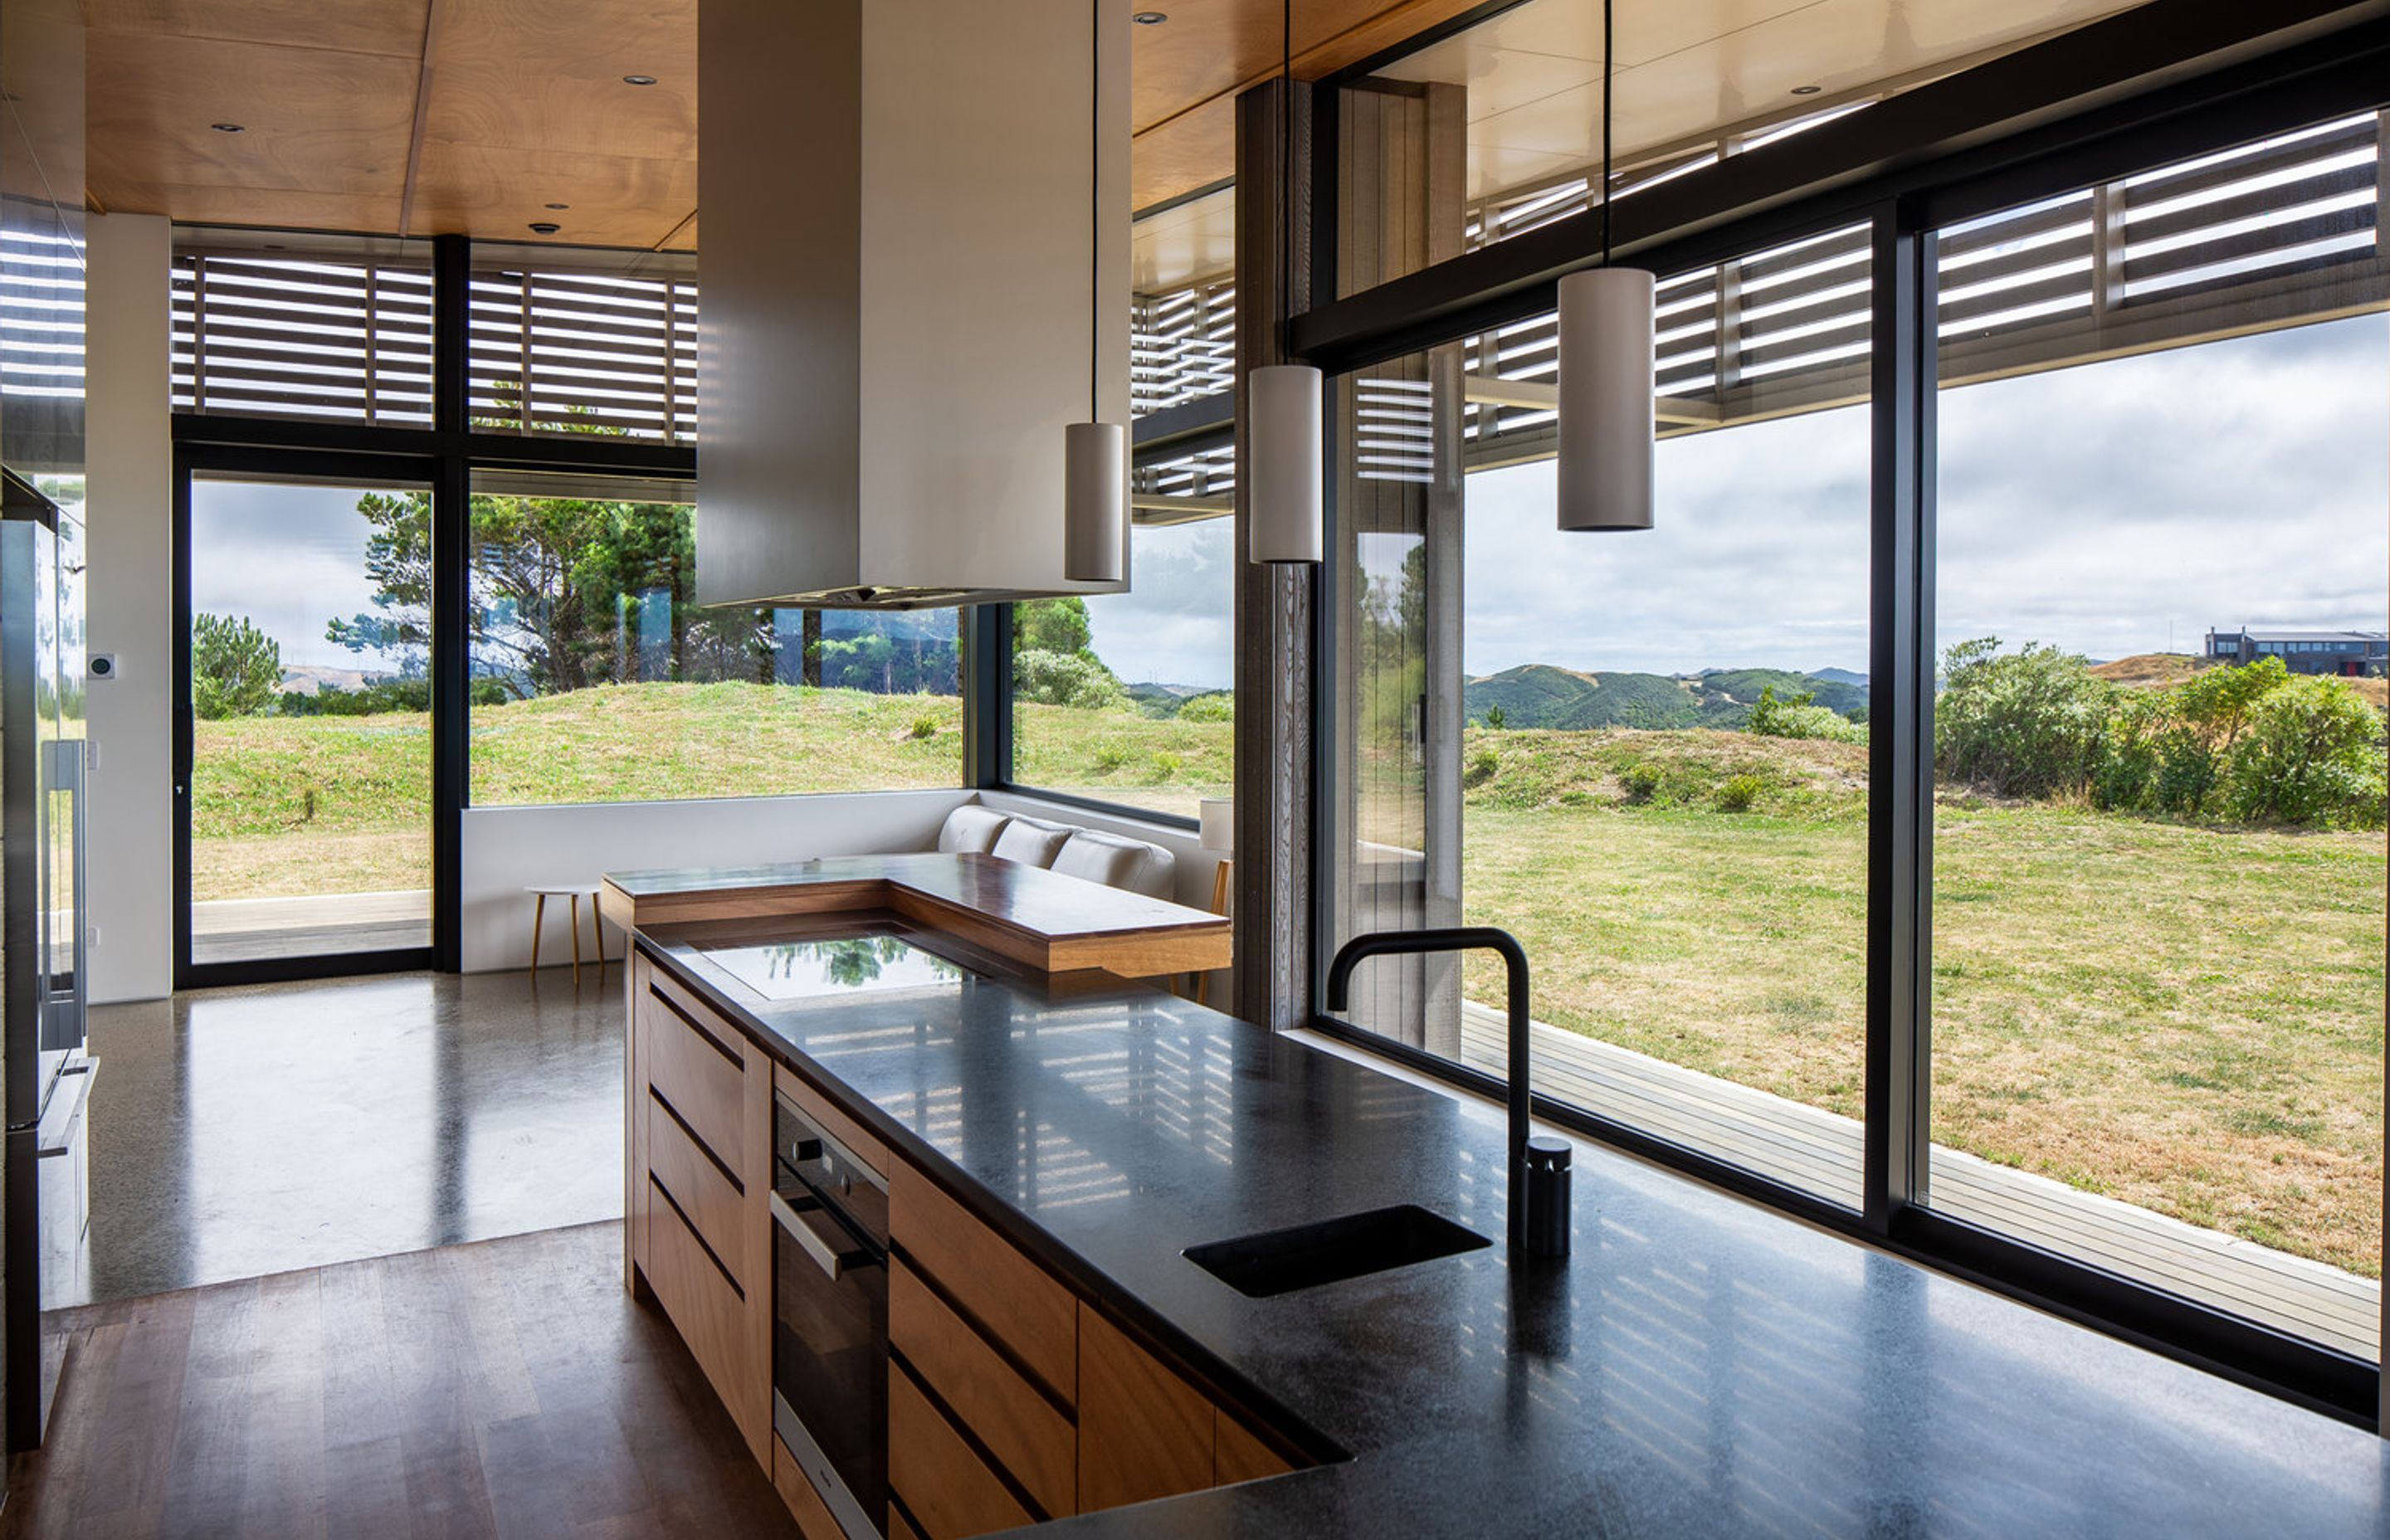 From the large kitchen island, the owners can enjoys views over Wellington.